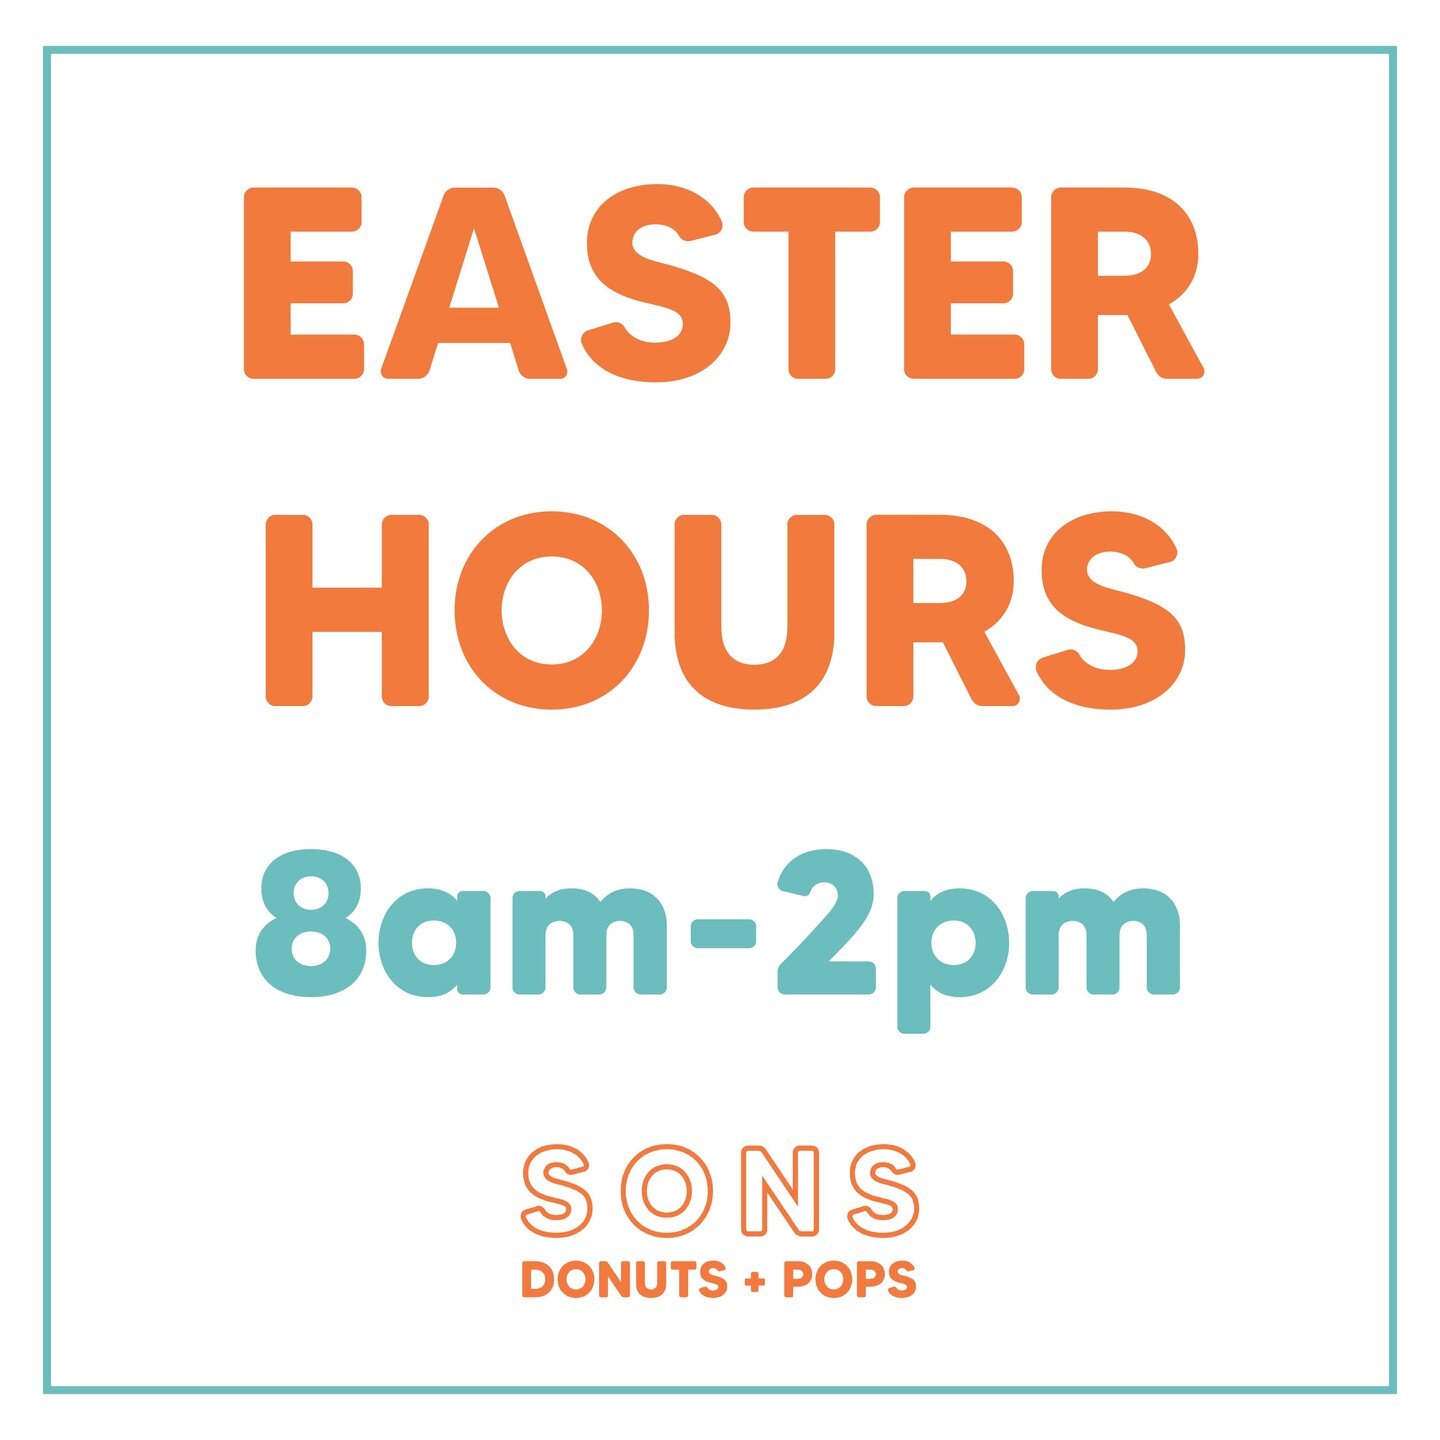 Our hours are a little different tomorrow....come see us!